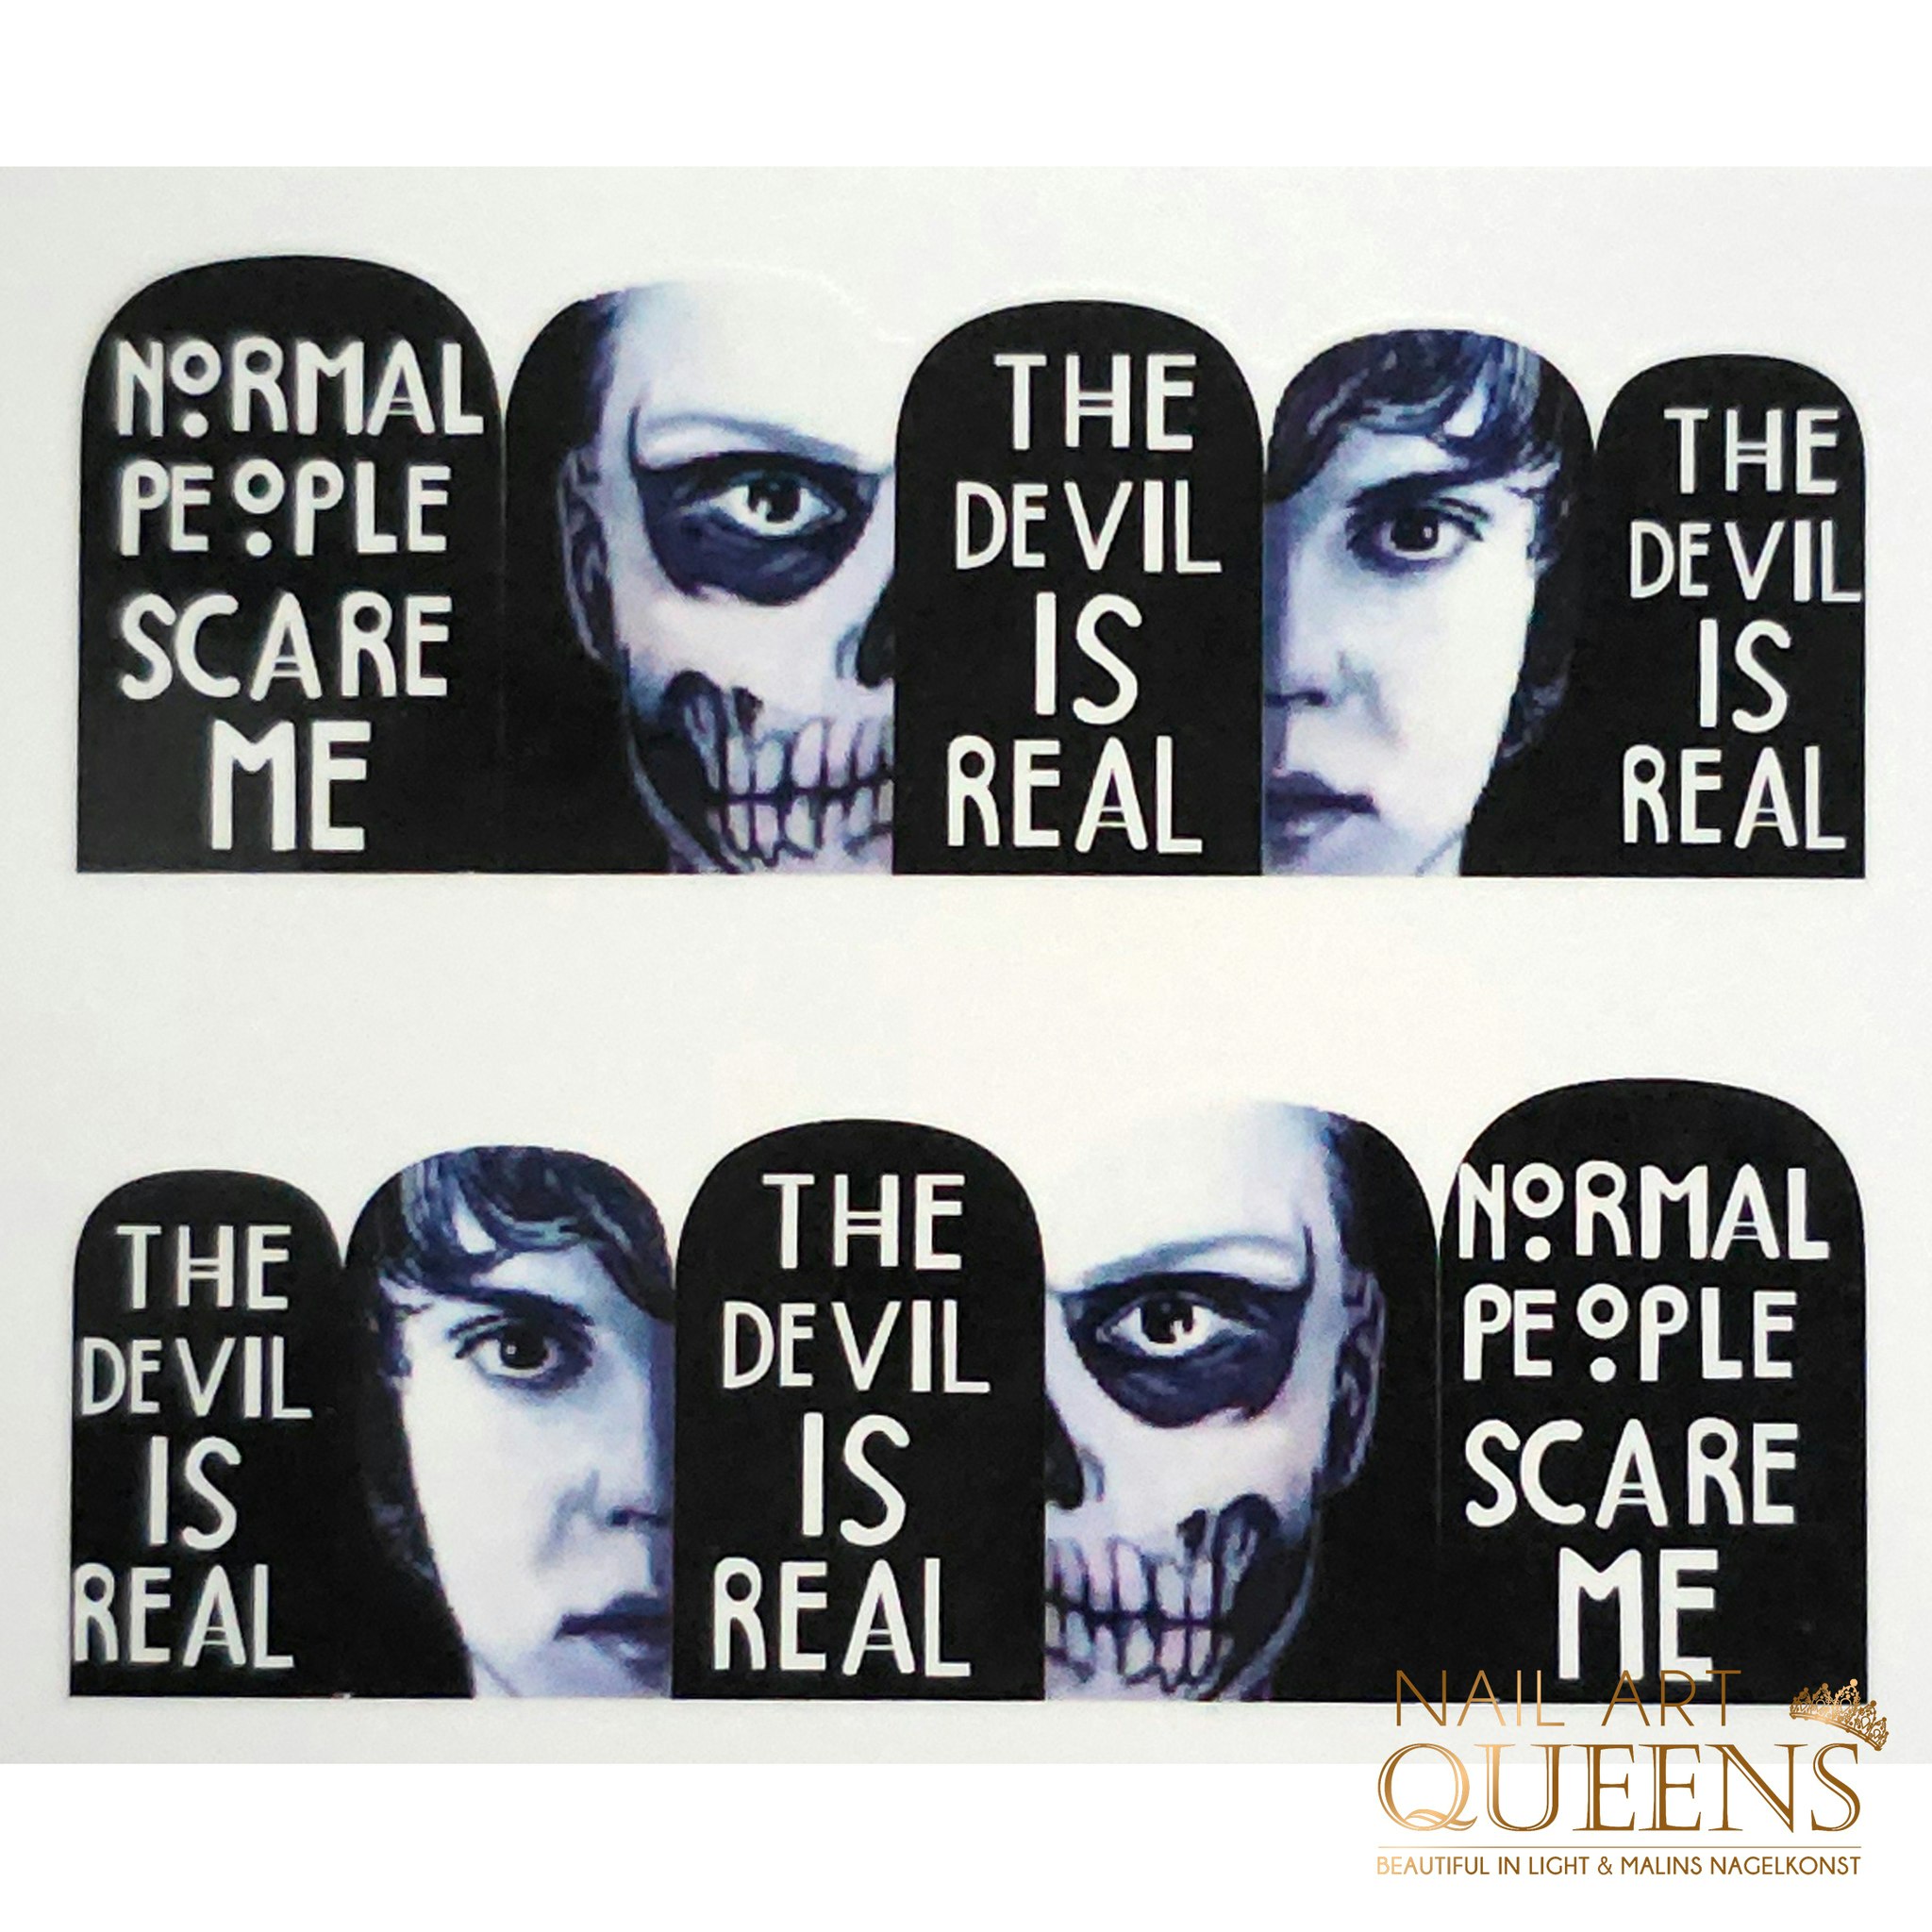 Stickers American horror story